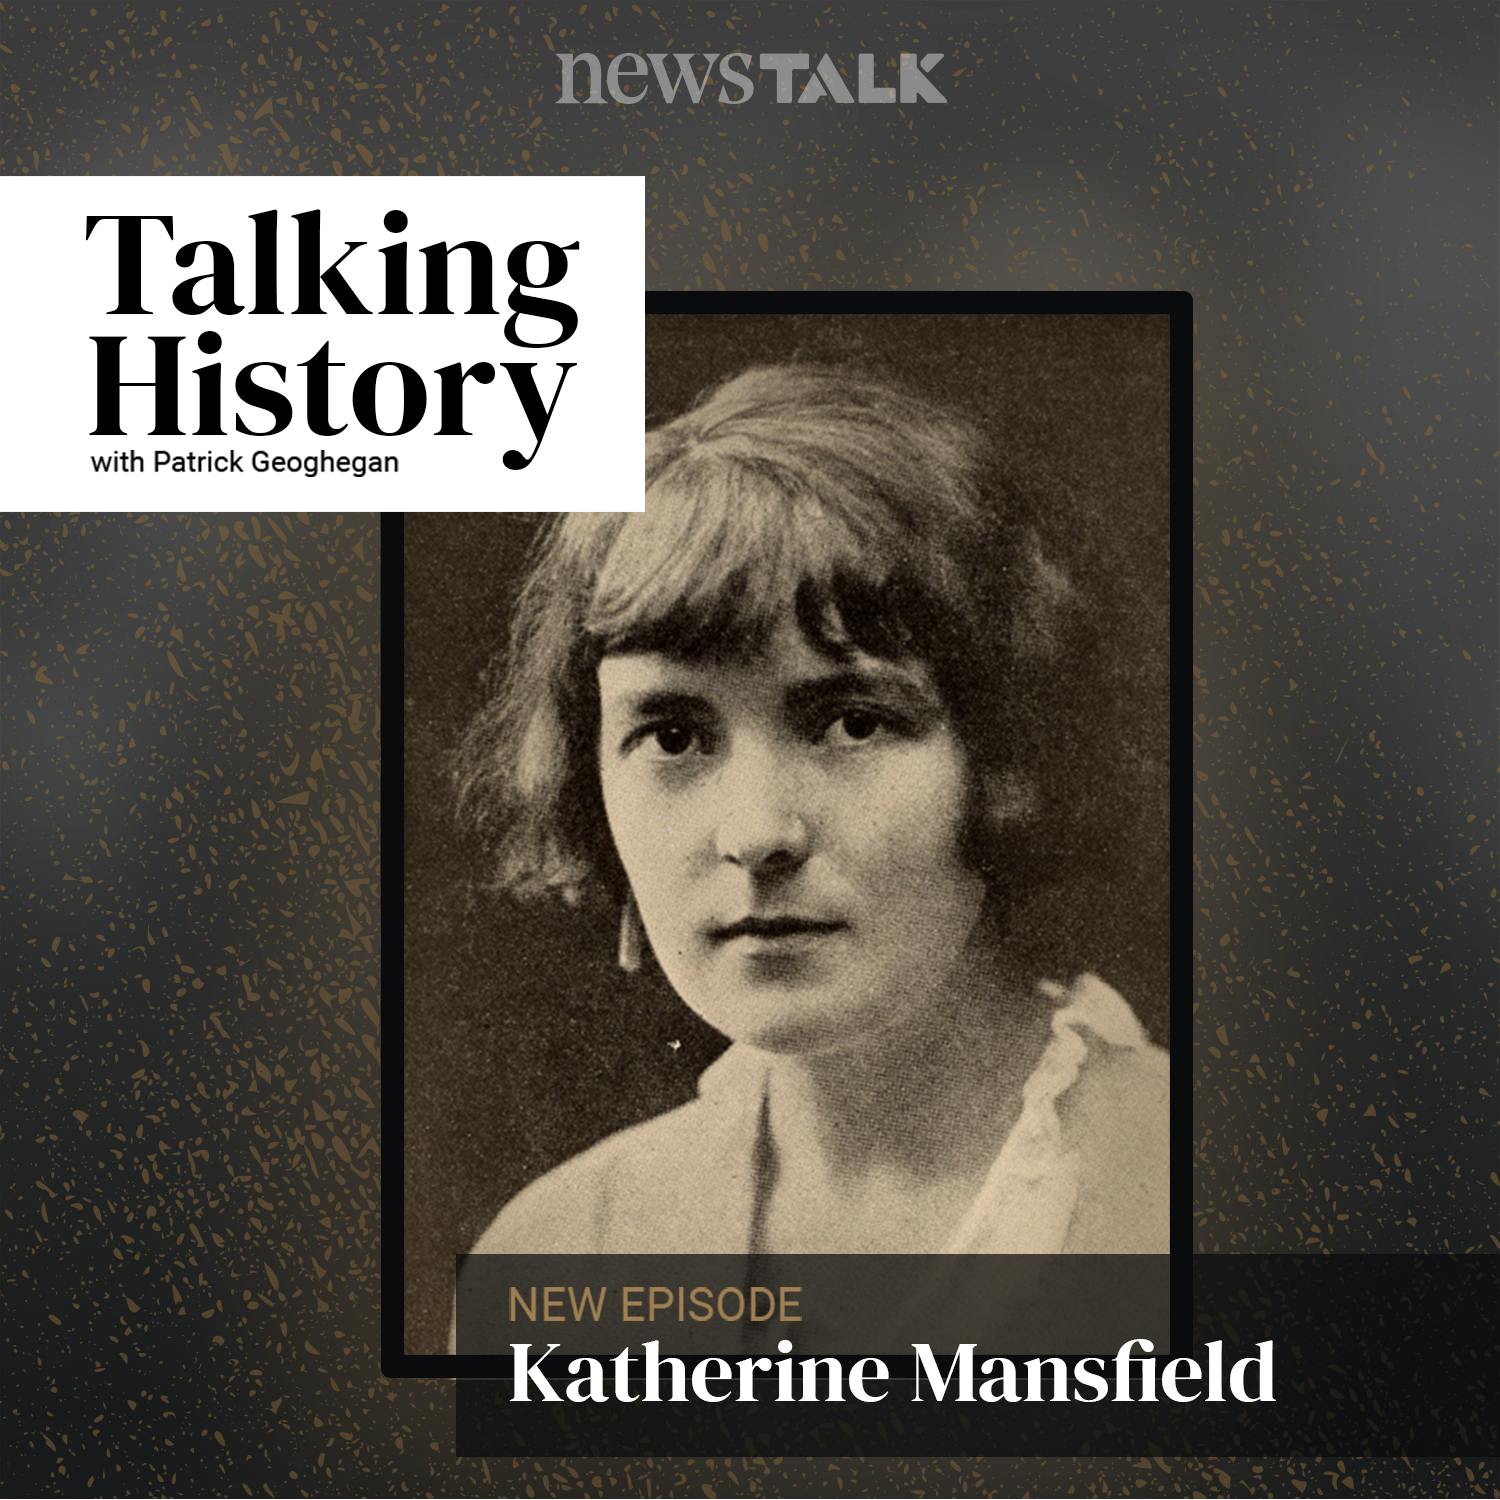 The life and legacy of Katherine Mansfield